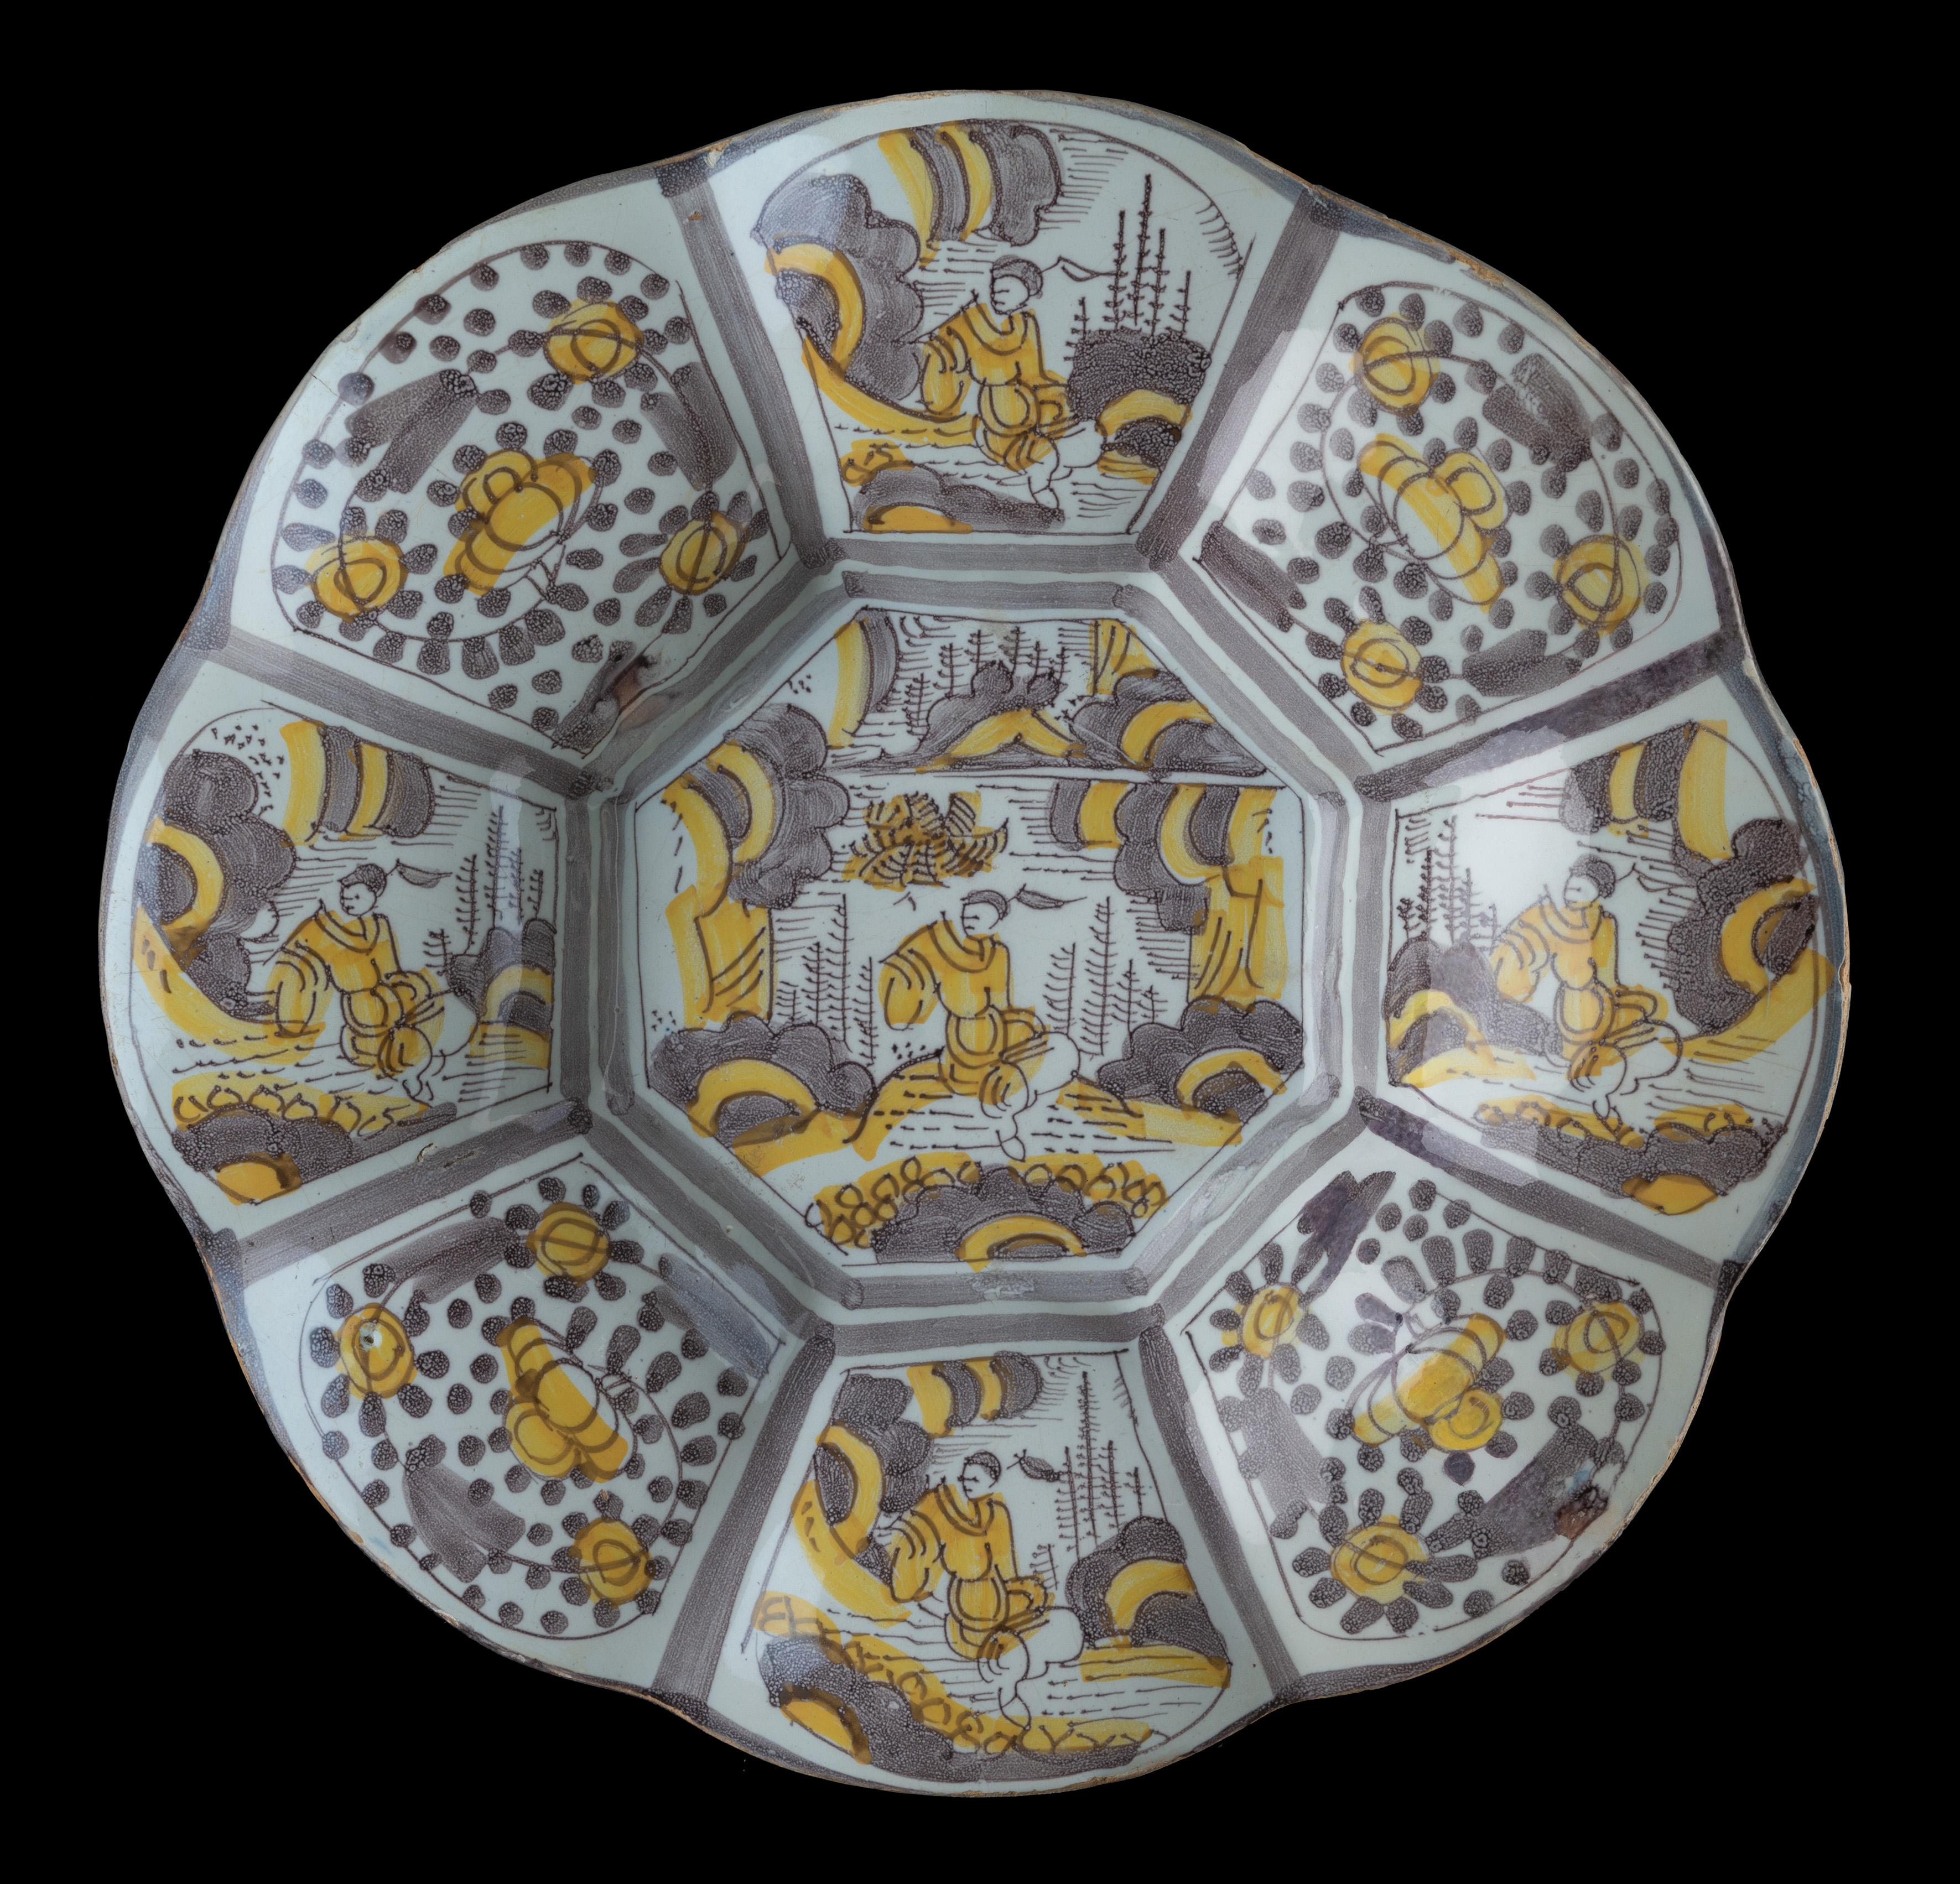 Purple and yellow chinoiserie lobed dish. Delft, 1680-1690 
Dimensions: diameter 34,5 cm / 13.58 in. 

The lobed dish is composed of eight wide lobes and is painted in purple and yellow with a chinoiserie décor. The centre is decorated with a